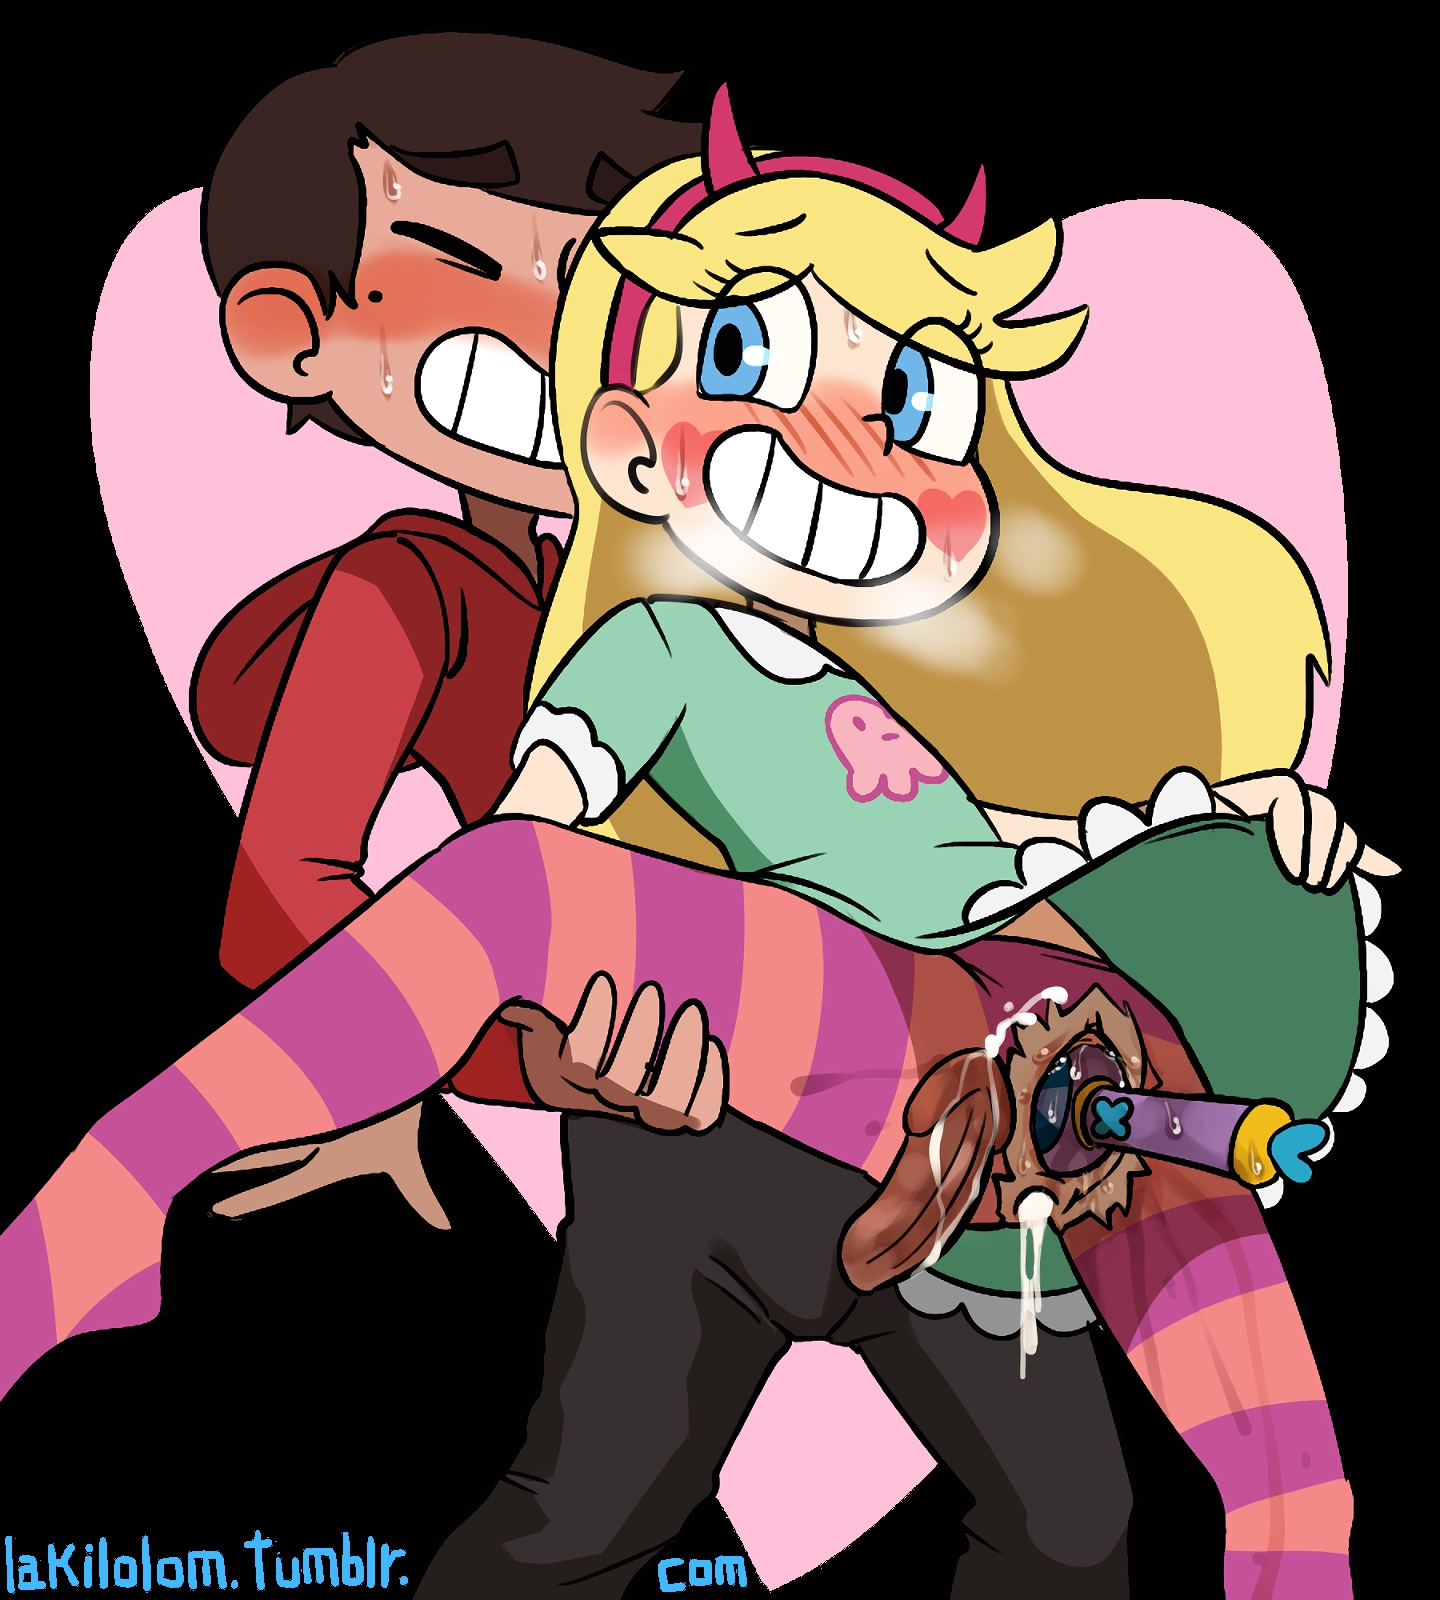 1595459_-_ikll_lakilolom_star_butterfly_star_vs_the_forces_of_evil_marco_diaz (1)